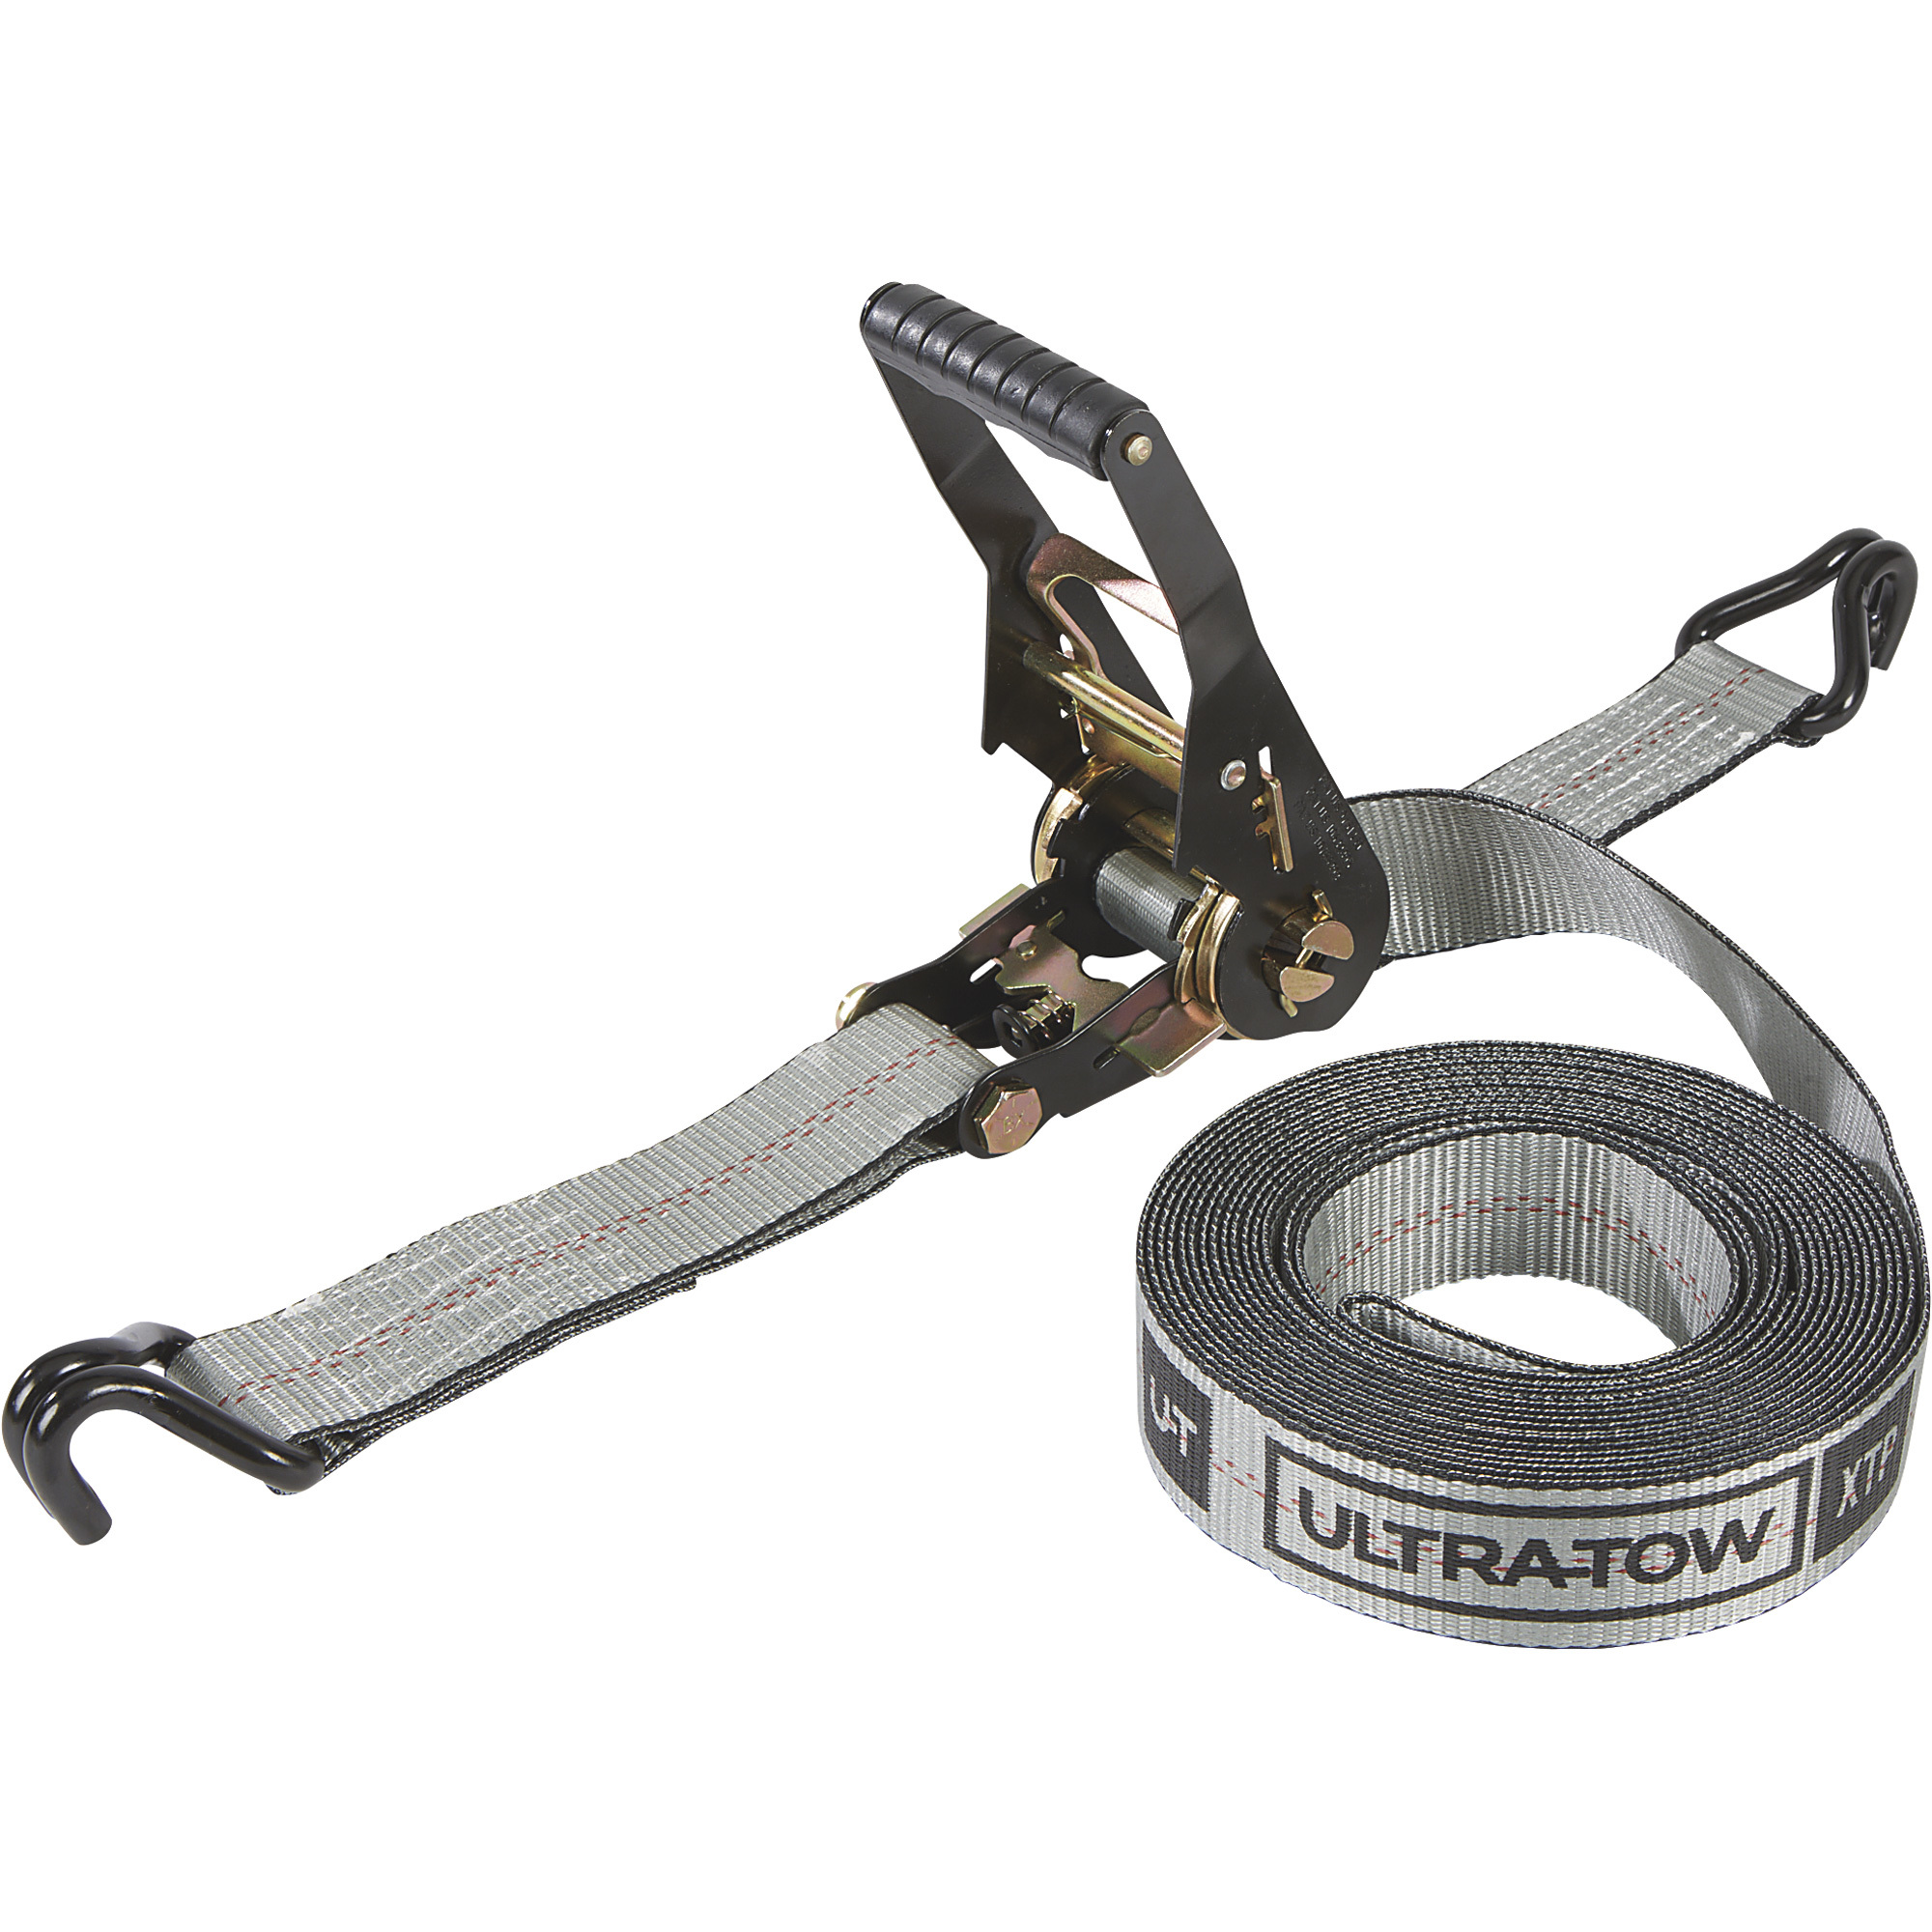 Ultra-Tow XTP 2Inch x 27ft. AST Ratchet Strap with J-Hook, 10,000-Lb. Breaking Strength, 3,300-Lb. Working Load, Gray, Model A815052